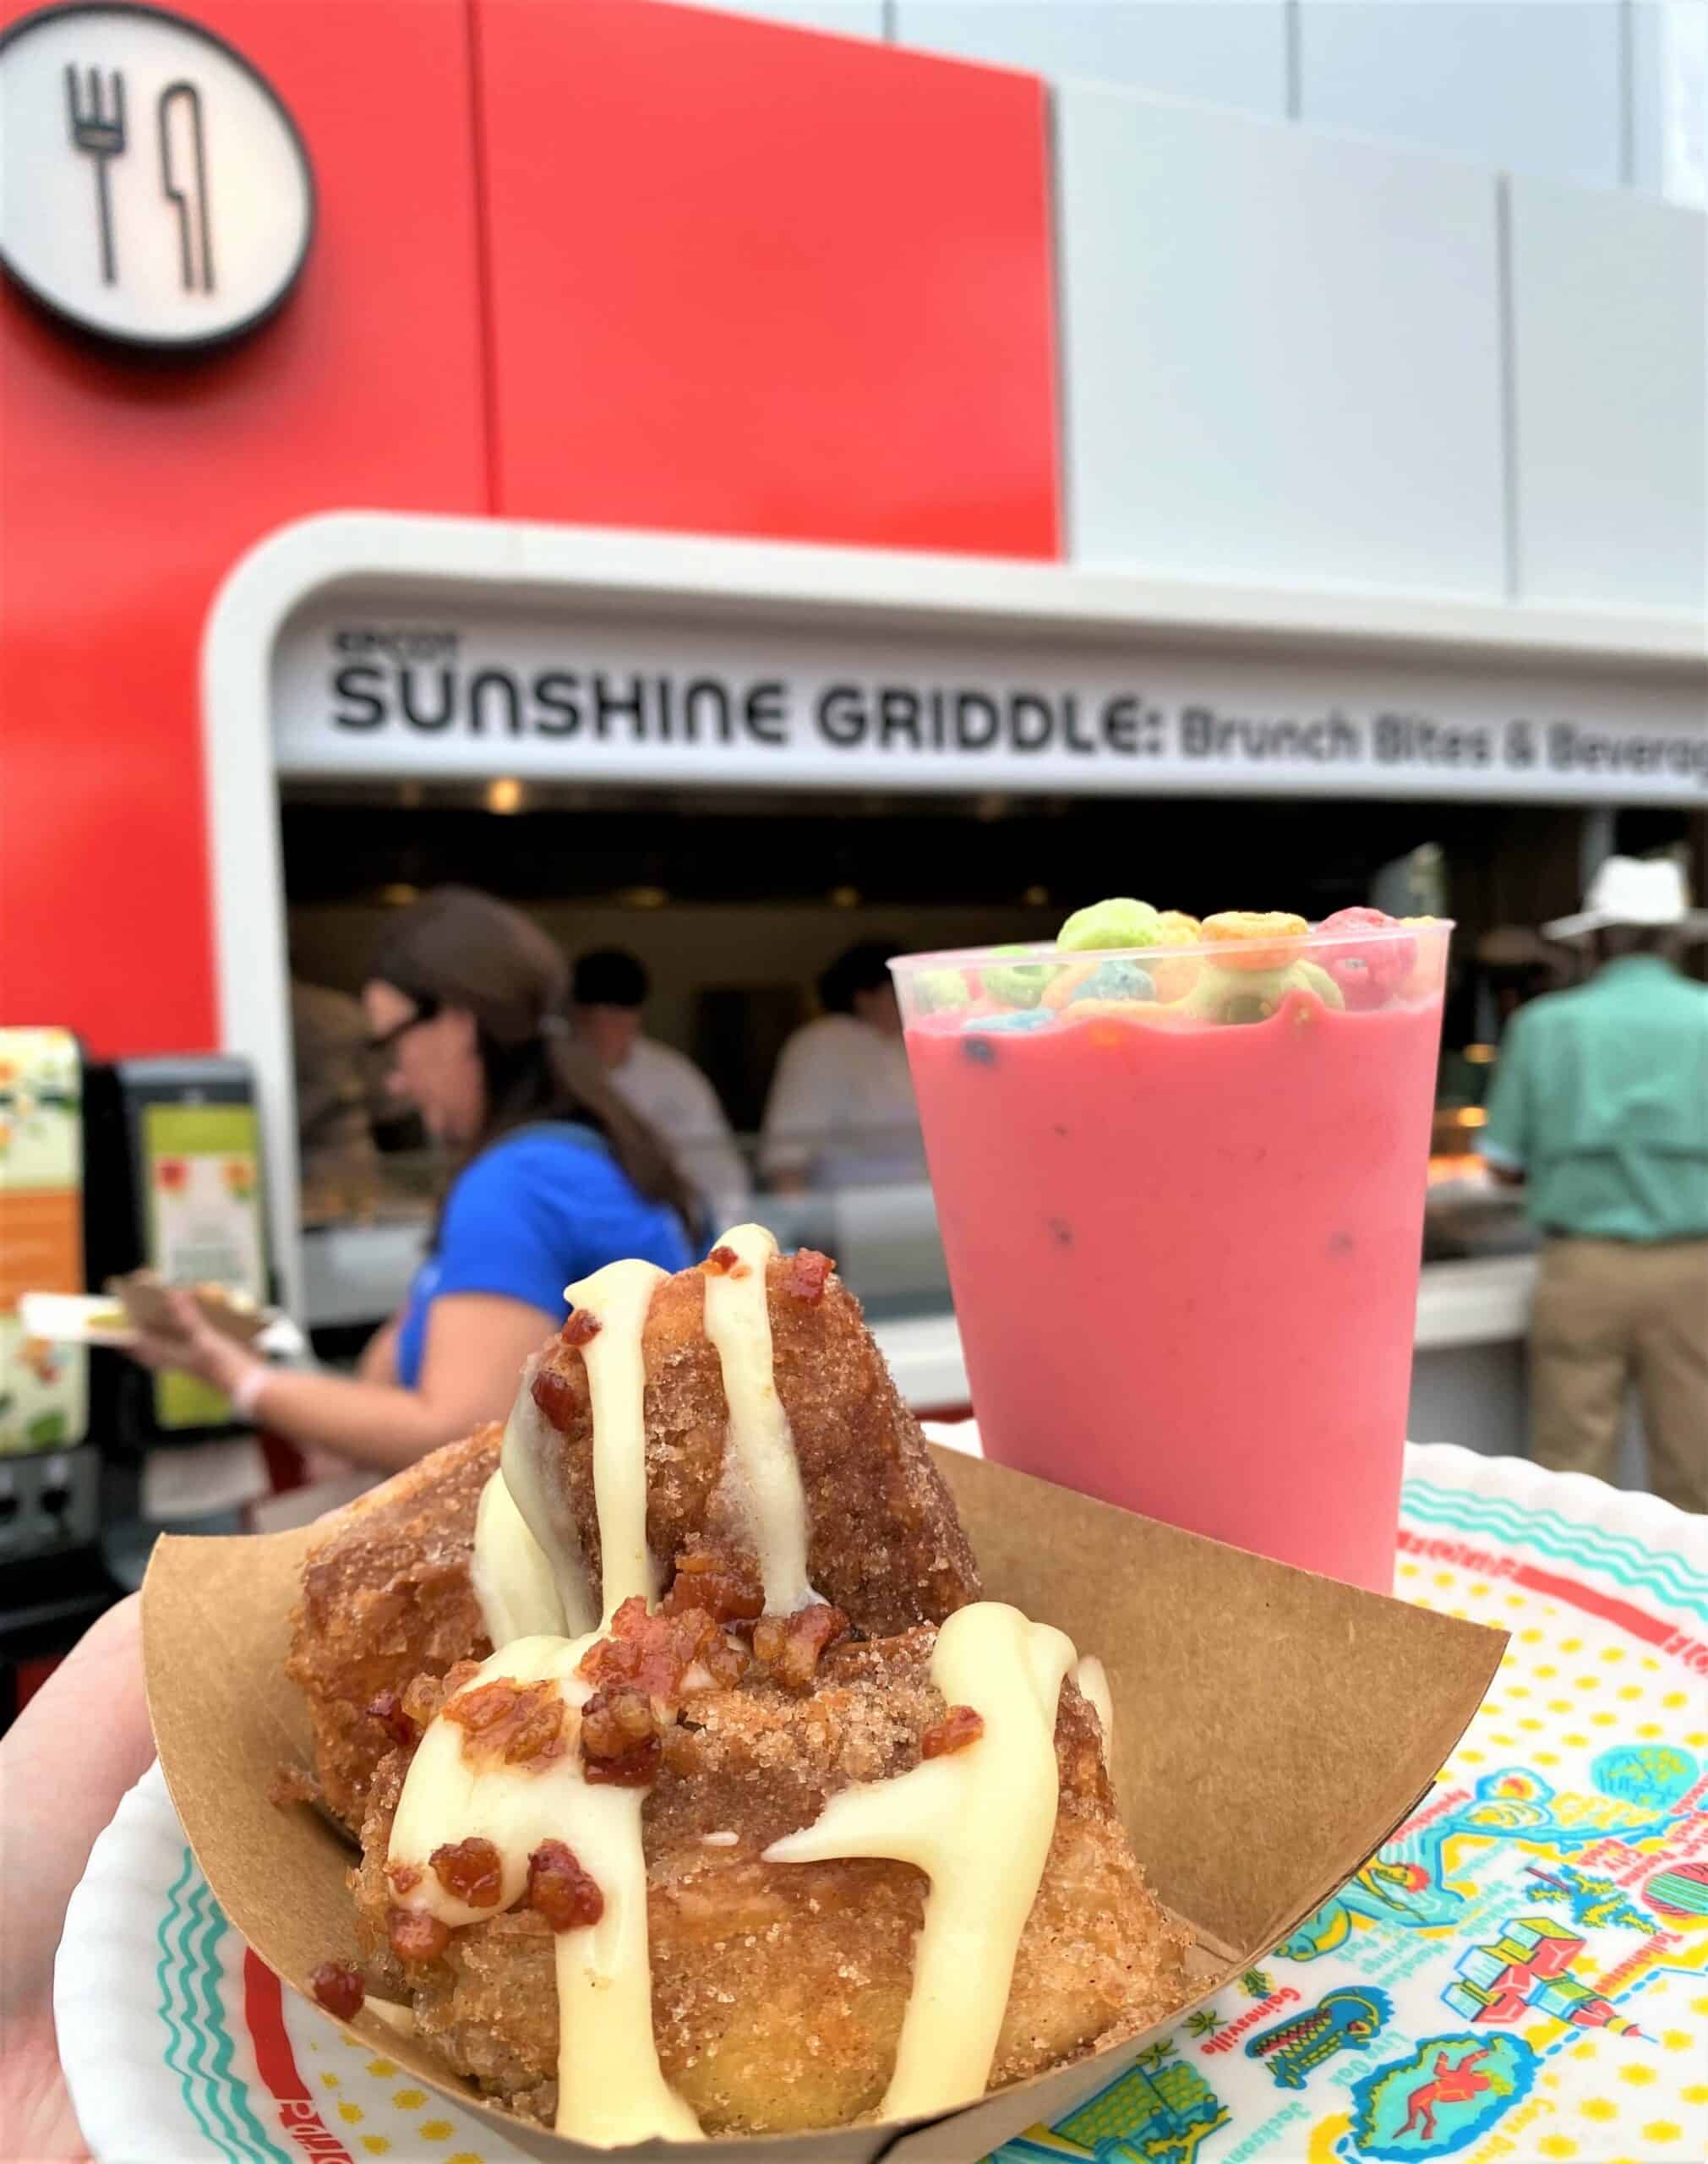 Cinnamon Bites and Fruit Loops shake held in front of Sunshine Griddle booth at Epcot Flower and Garden 2022